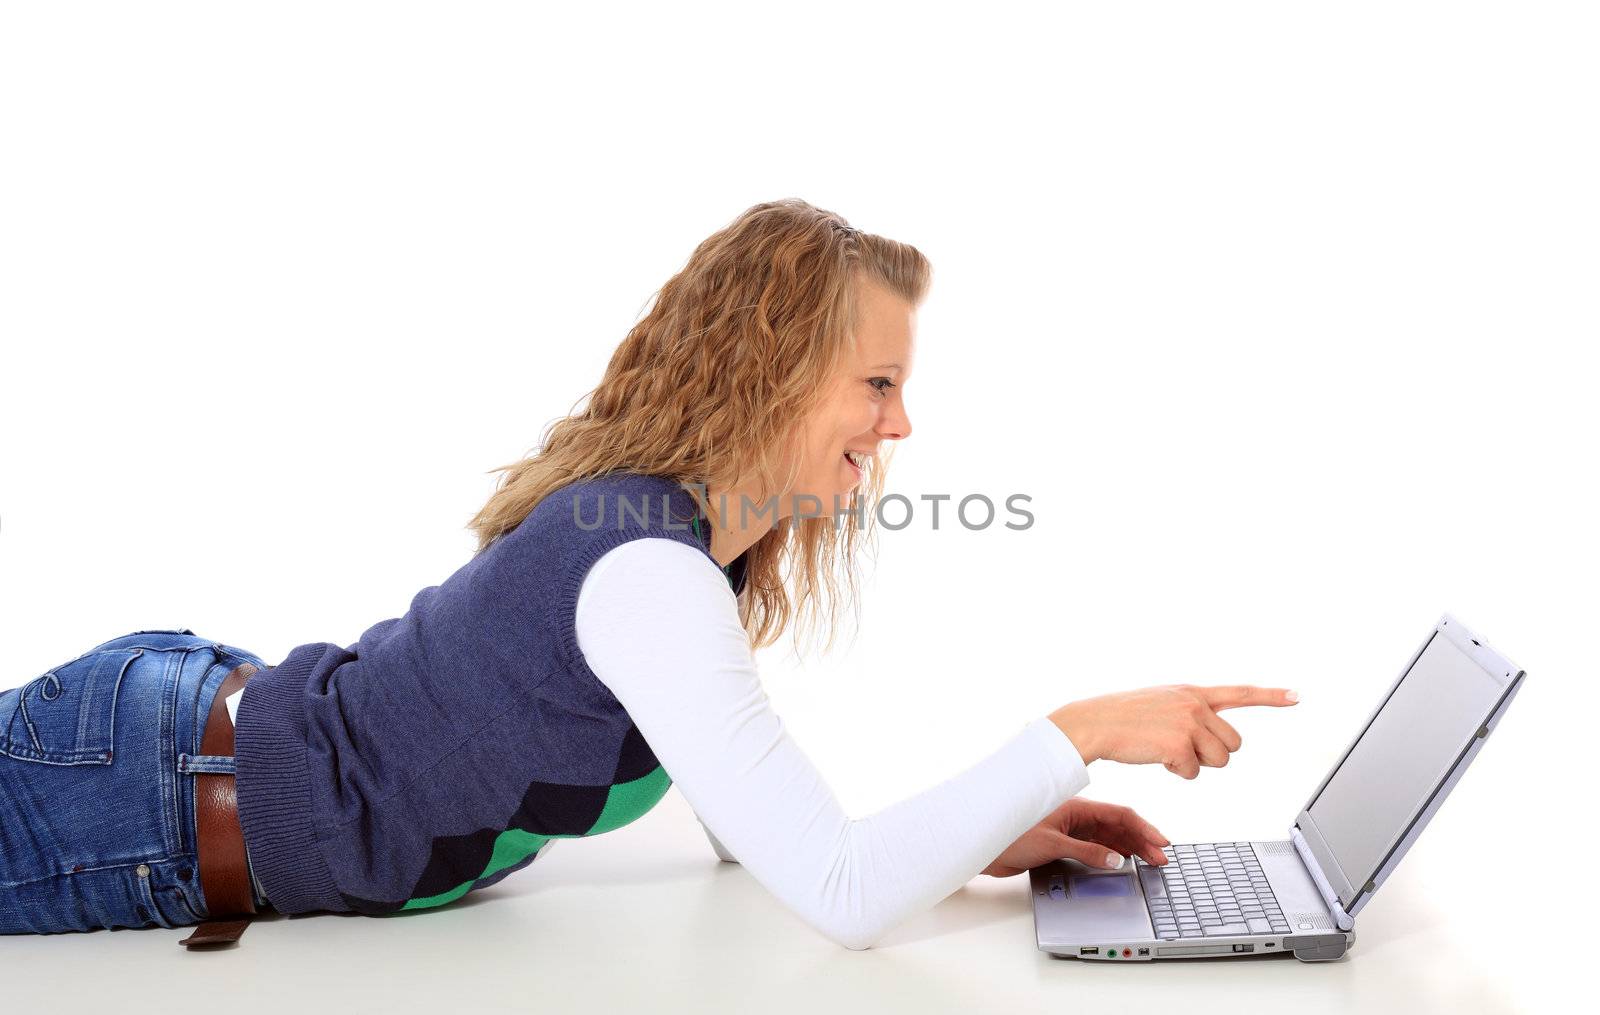 Attractive young woman lying on floor using notebook computer. All on white background.